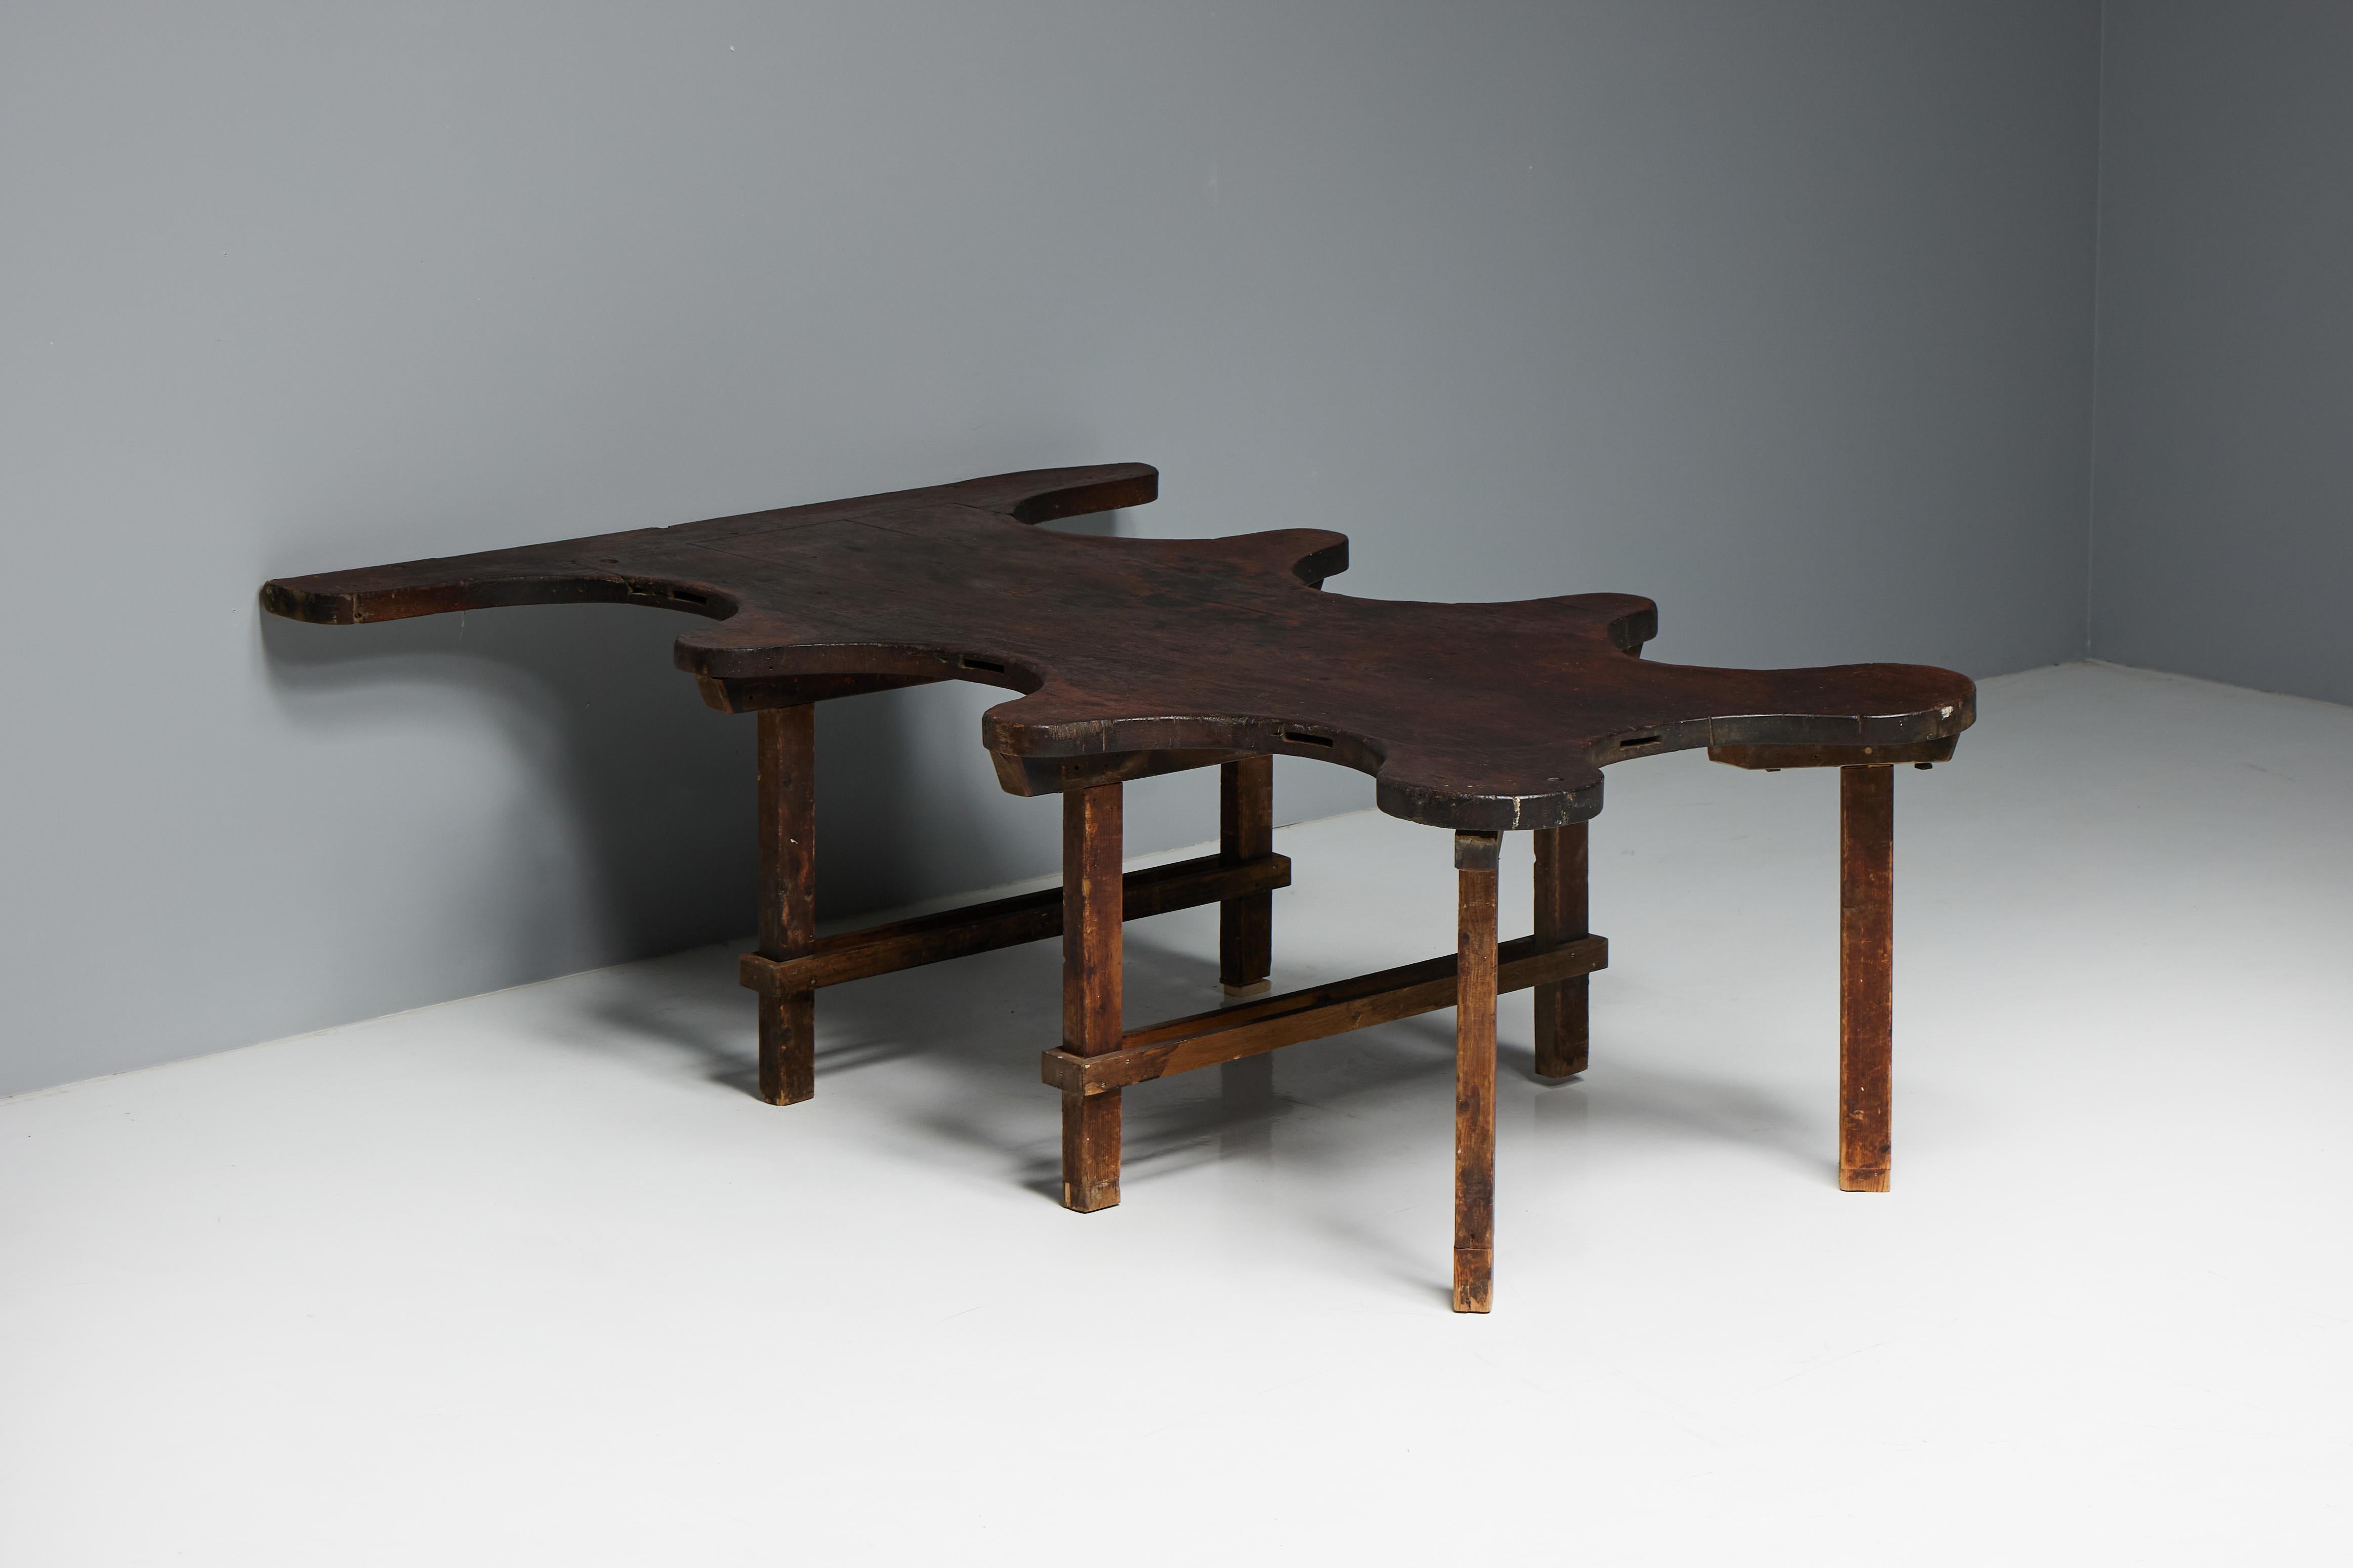 Rustic Free Form Organic Table, France, Late 19th Century For Sale 15